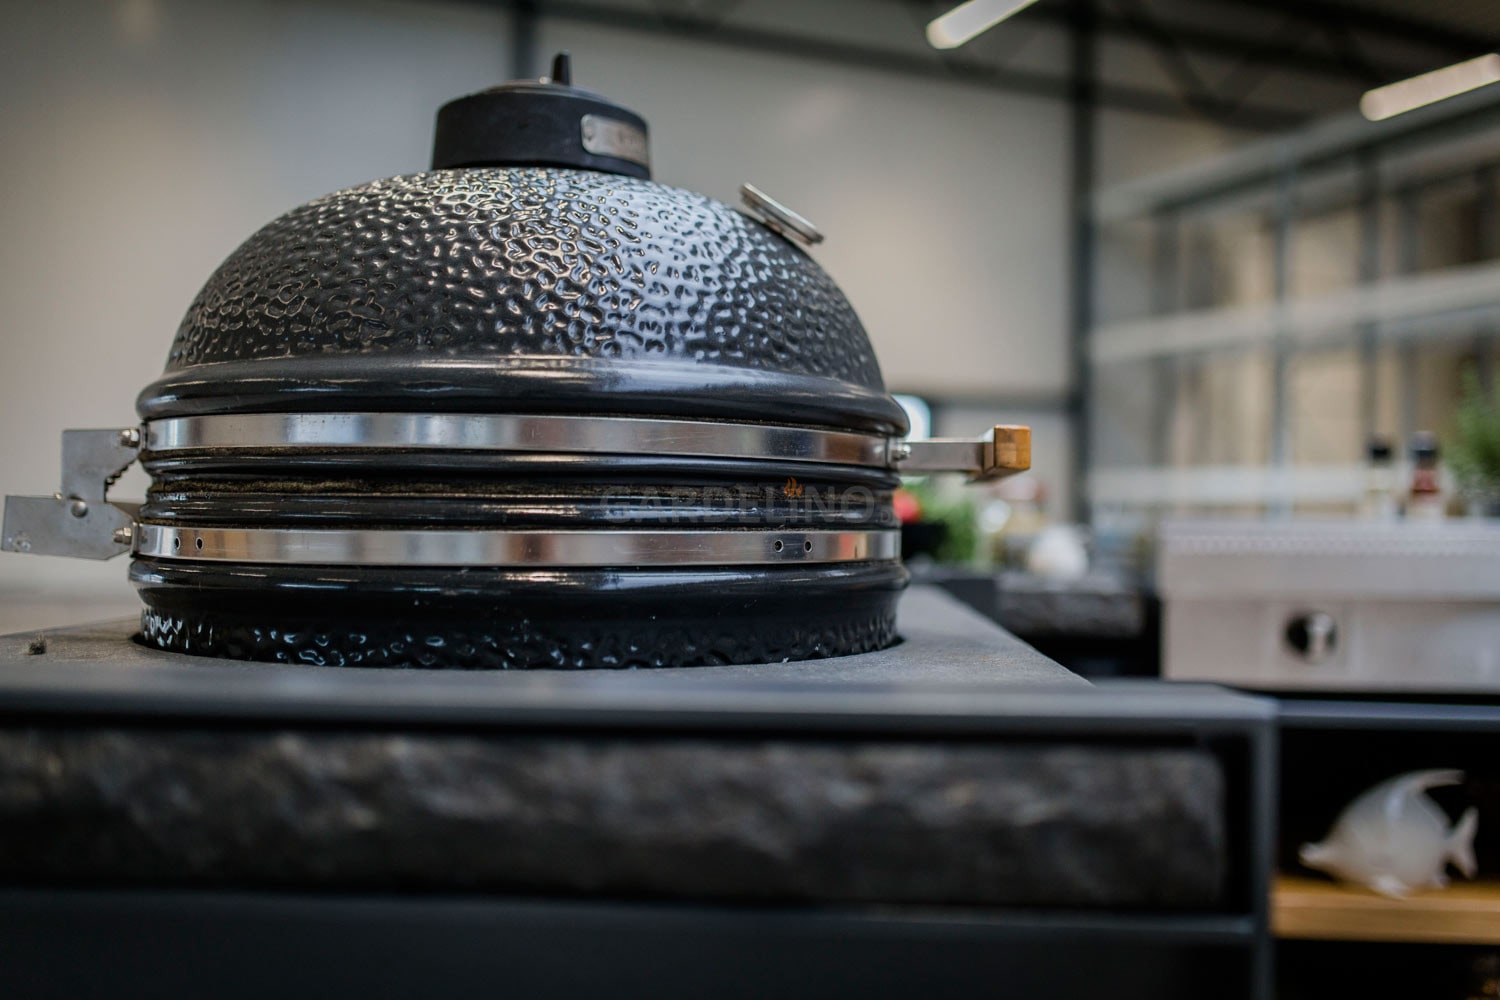 Kamadogrill in Oehler Outdoorkitchen integriert